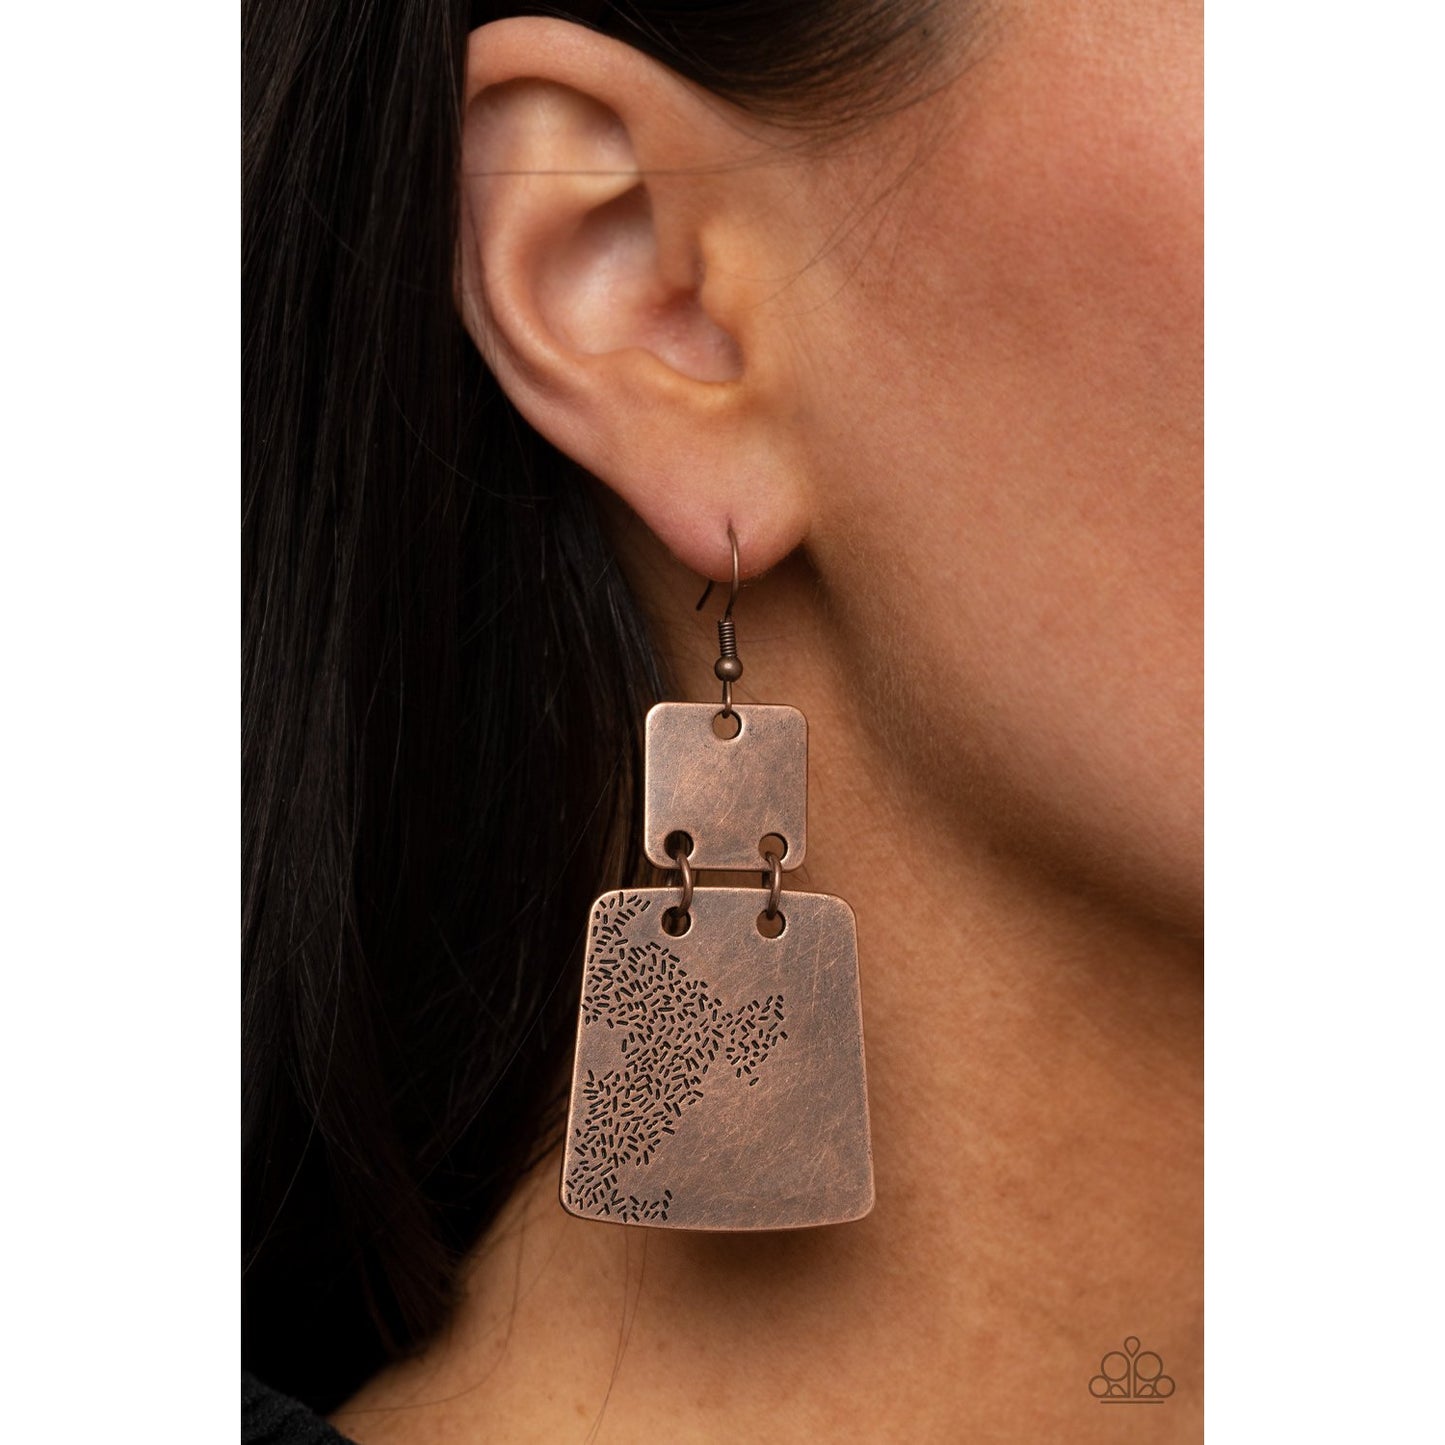 Tagging Along - Copper Earrings - Paparazzi Accessories - GlaMarous Titi Jewels